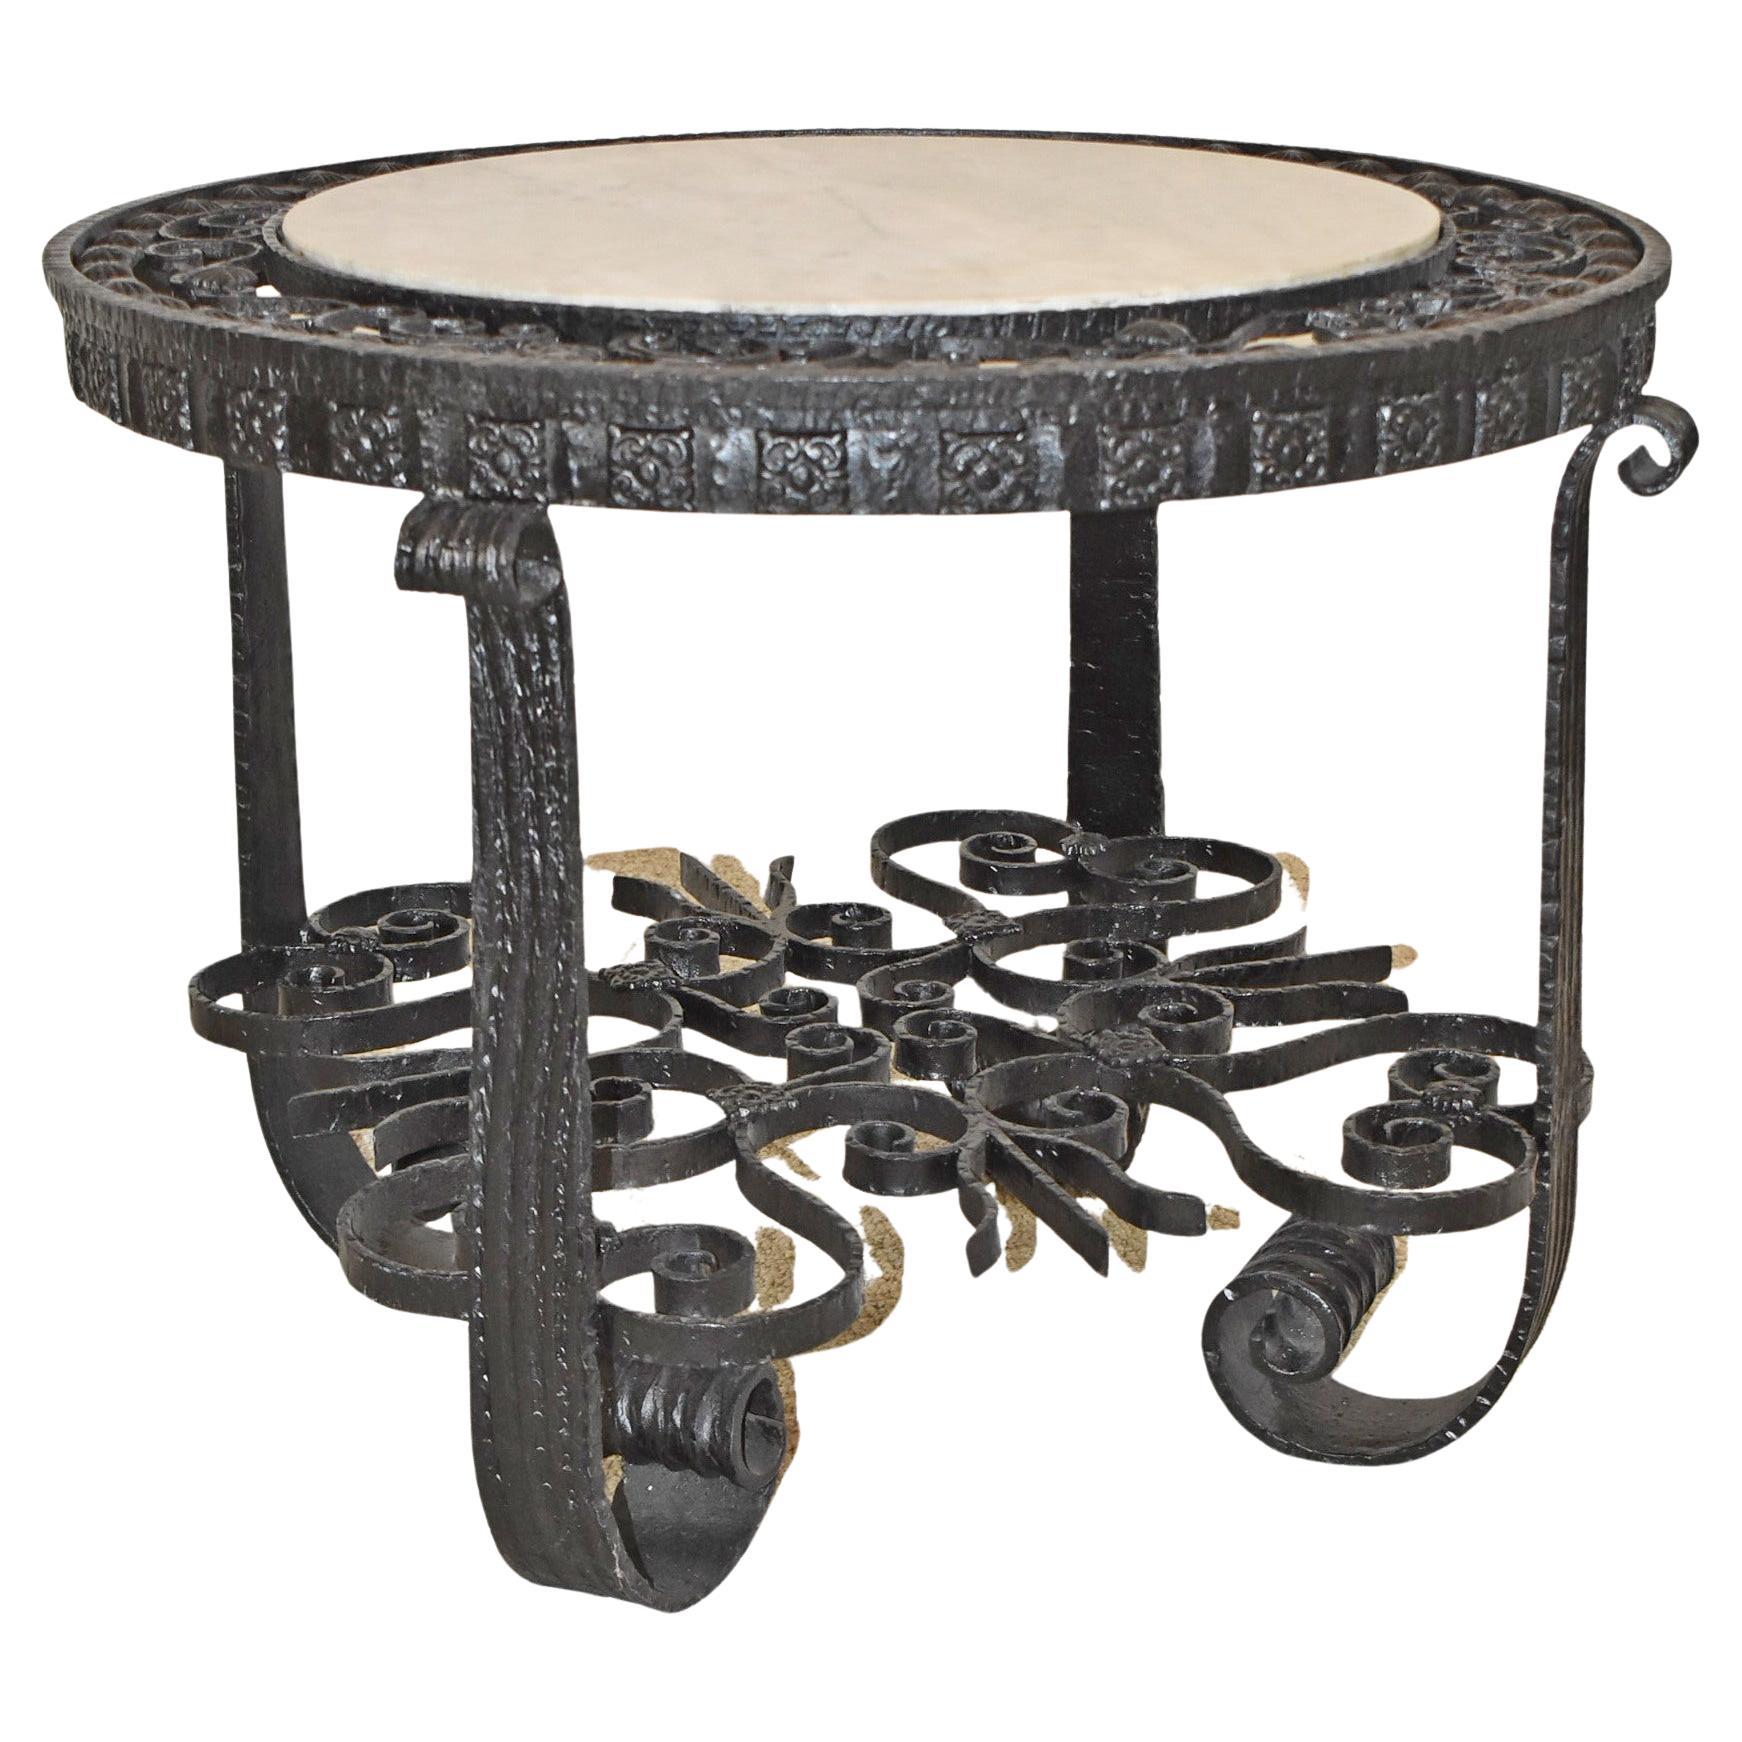 Spanish Revival Wrought Iron Table with Marble Top For Sale